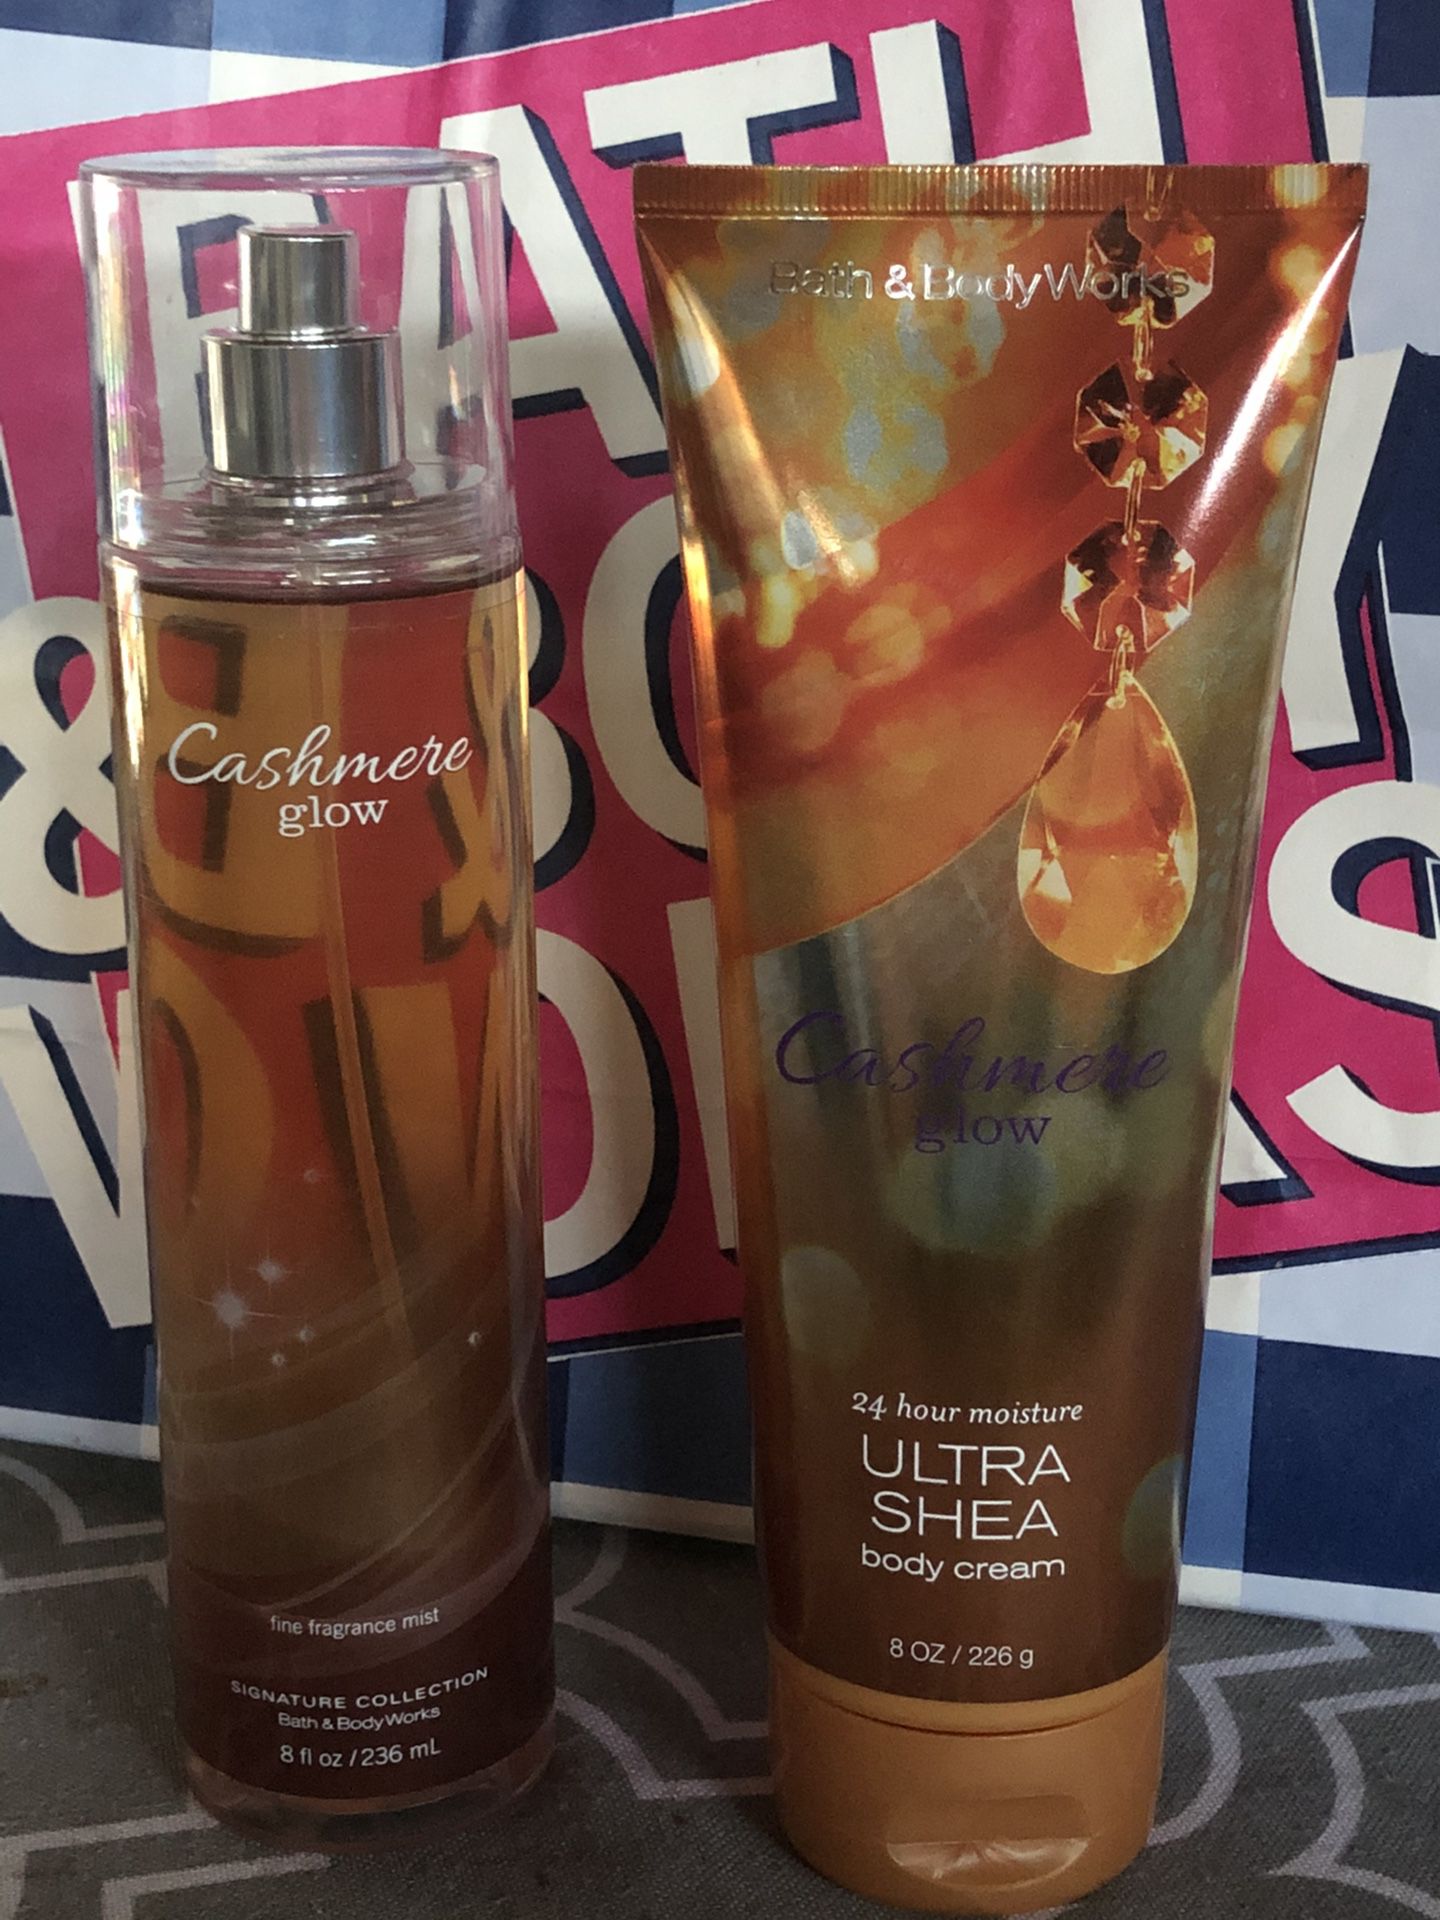 Cashmere Glow Fine Fragrance Mist and Ultra Shea Body Cream. By Bath And Body Works. Sold together as a set. $9.50. See Description For Details.